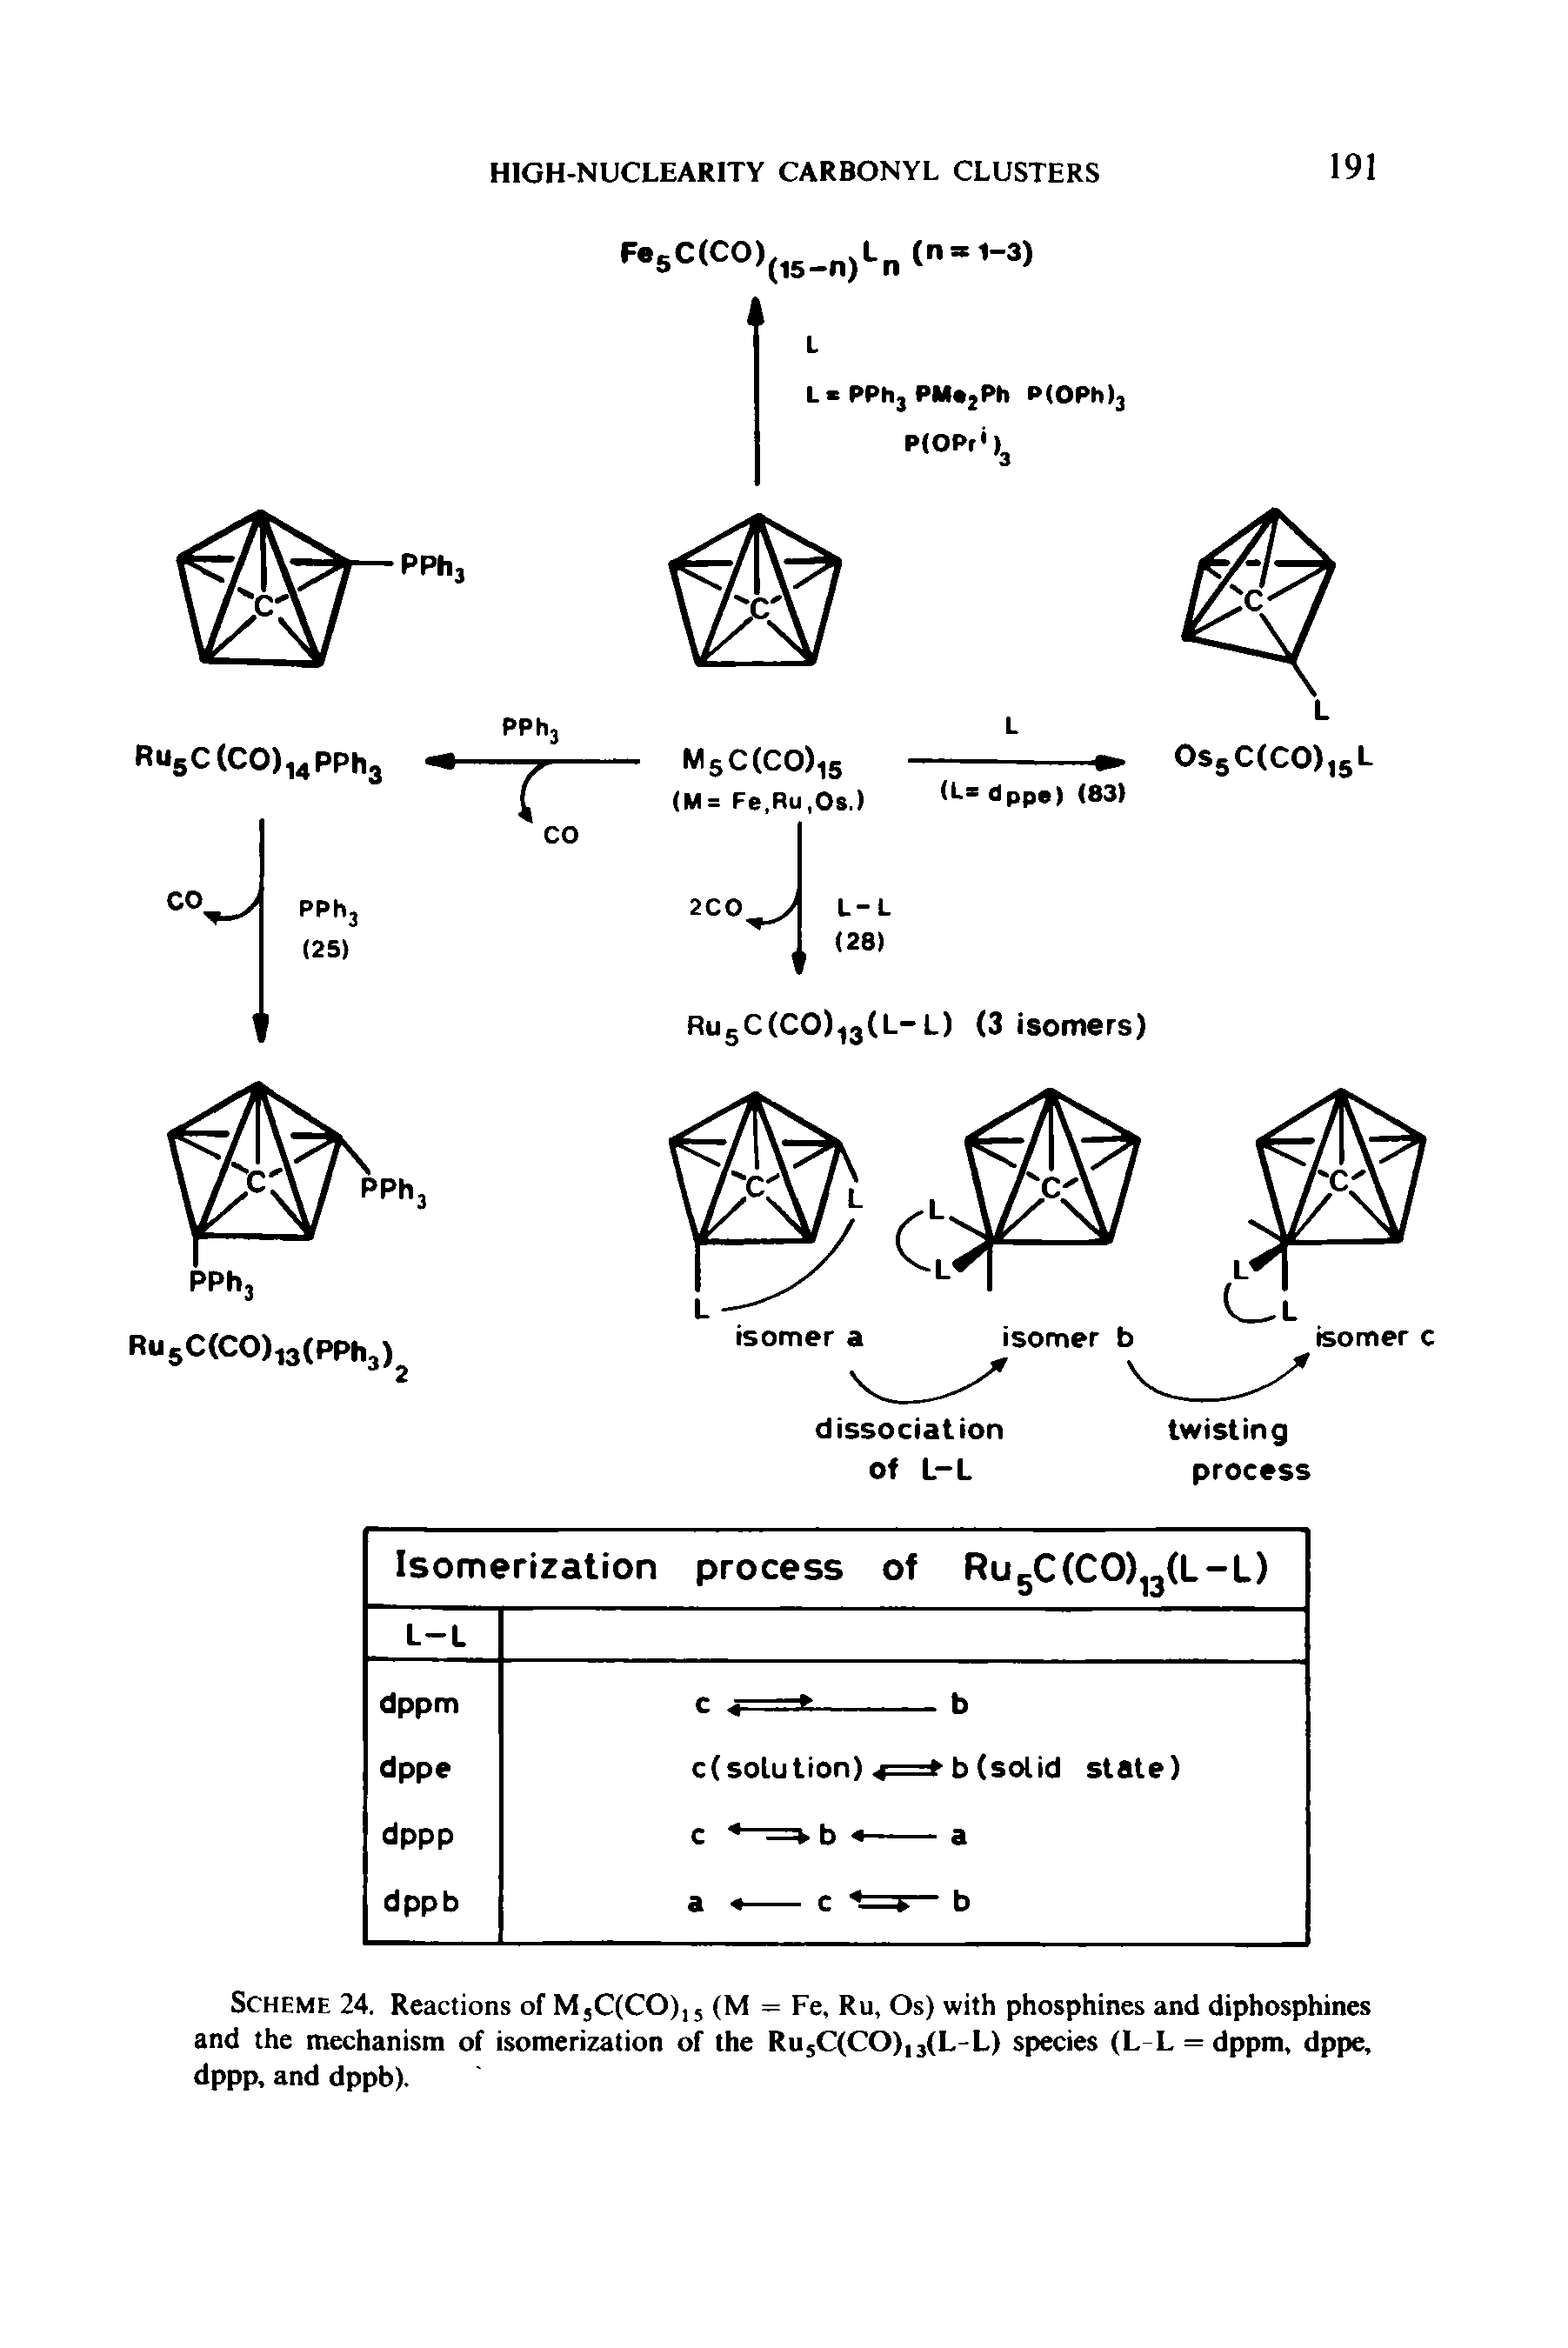 Scheme 24. Reactions of MjCfCO), (M = Fe, Ru, Os) with phosphines and diphosphines and the mechanism of isomerization of the Ru5C(CO),3(L-L) species (L L = dppm, dppe, dppp, and dppb).